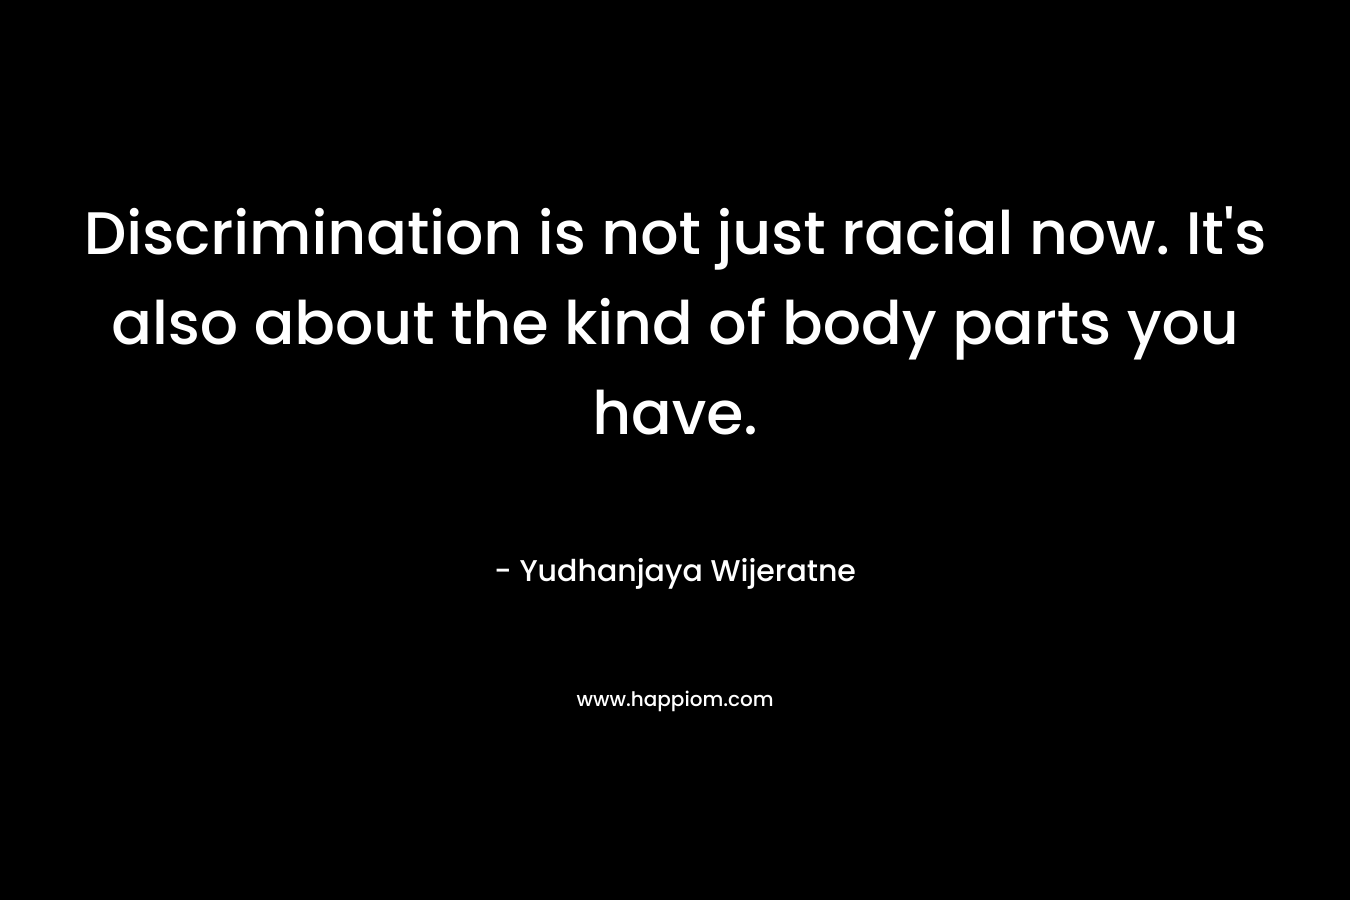 Discrimination is not just racial now. It’s also about the kind of body parts you have. – Yudhanjaya Wijeratne